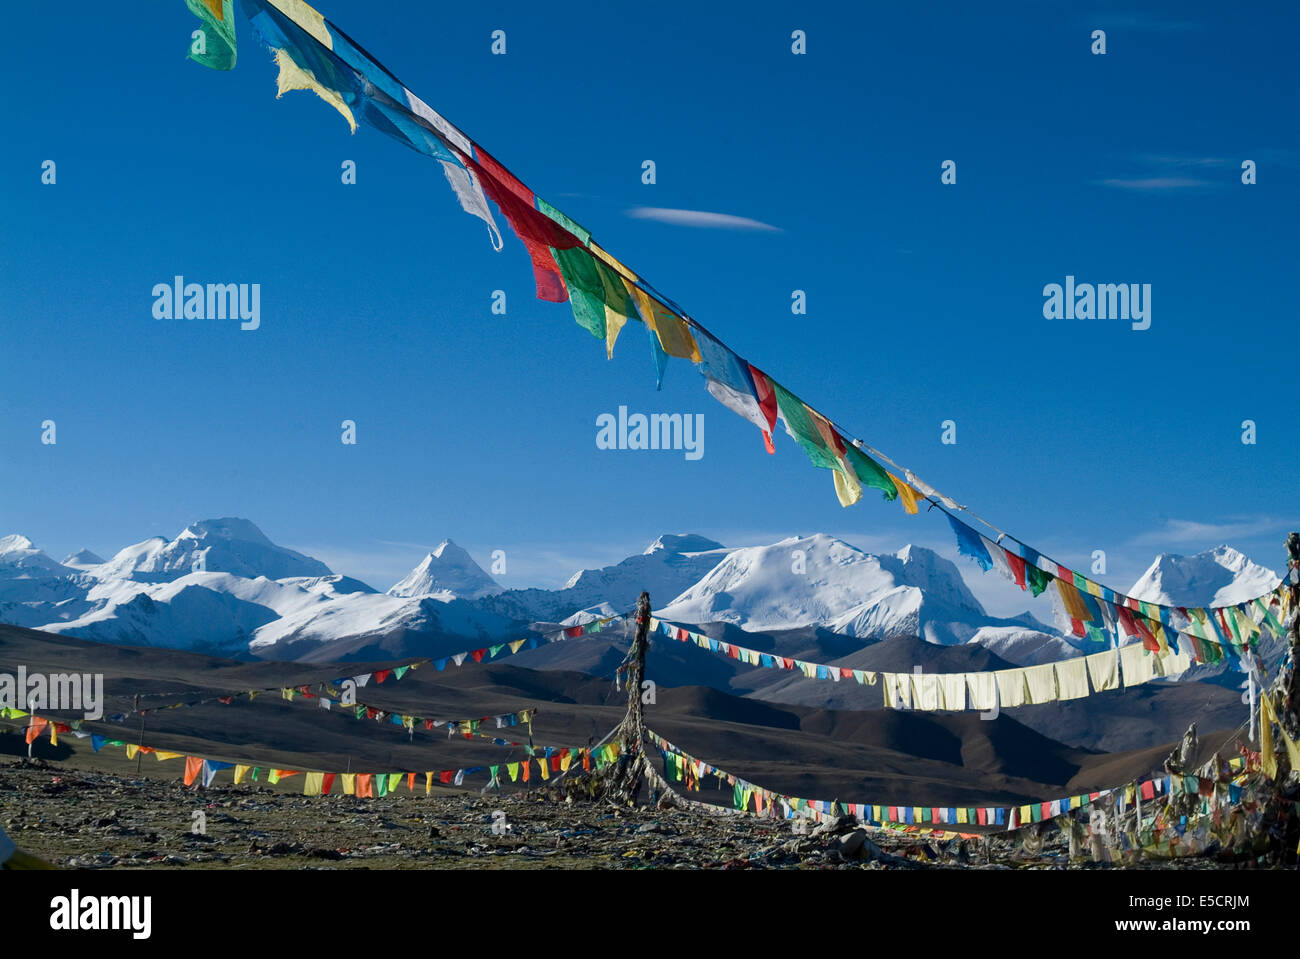 Himalaya Range with prayer flags in the foreground, Tibet, China Stock Photo